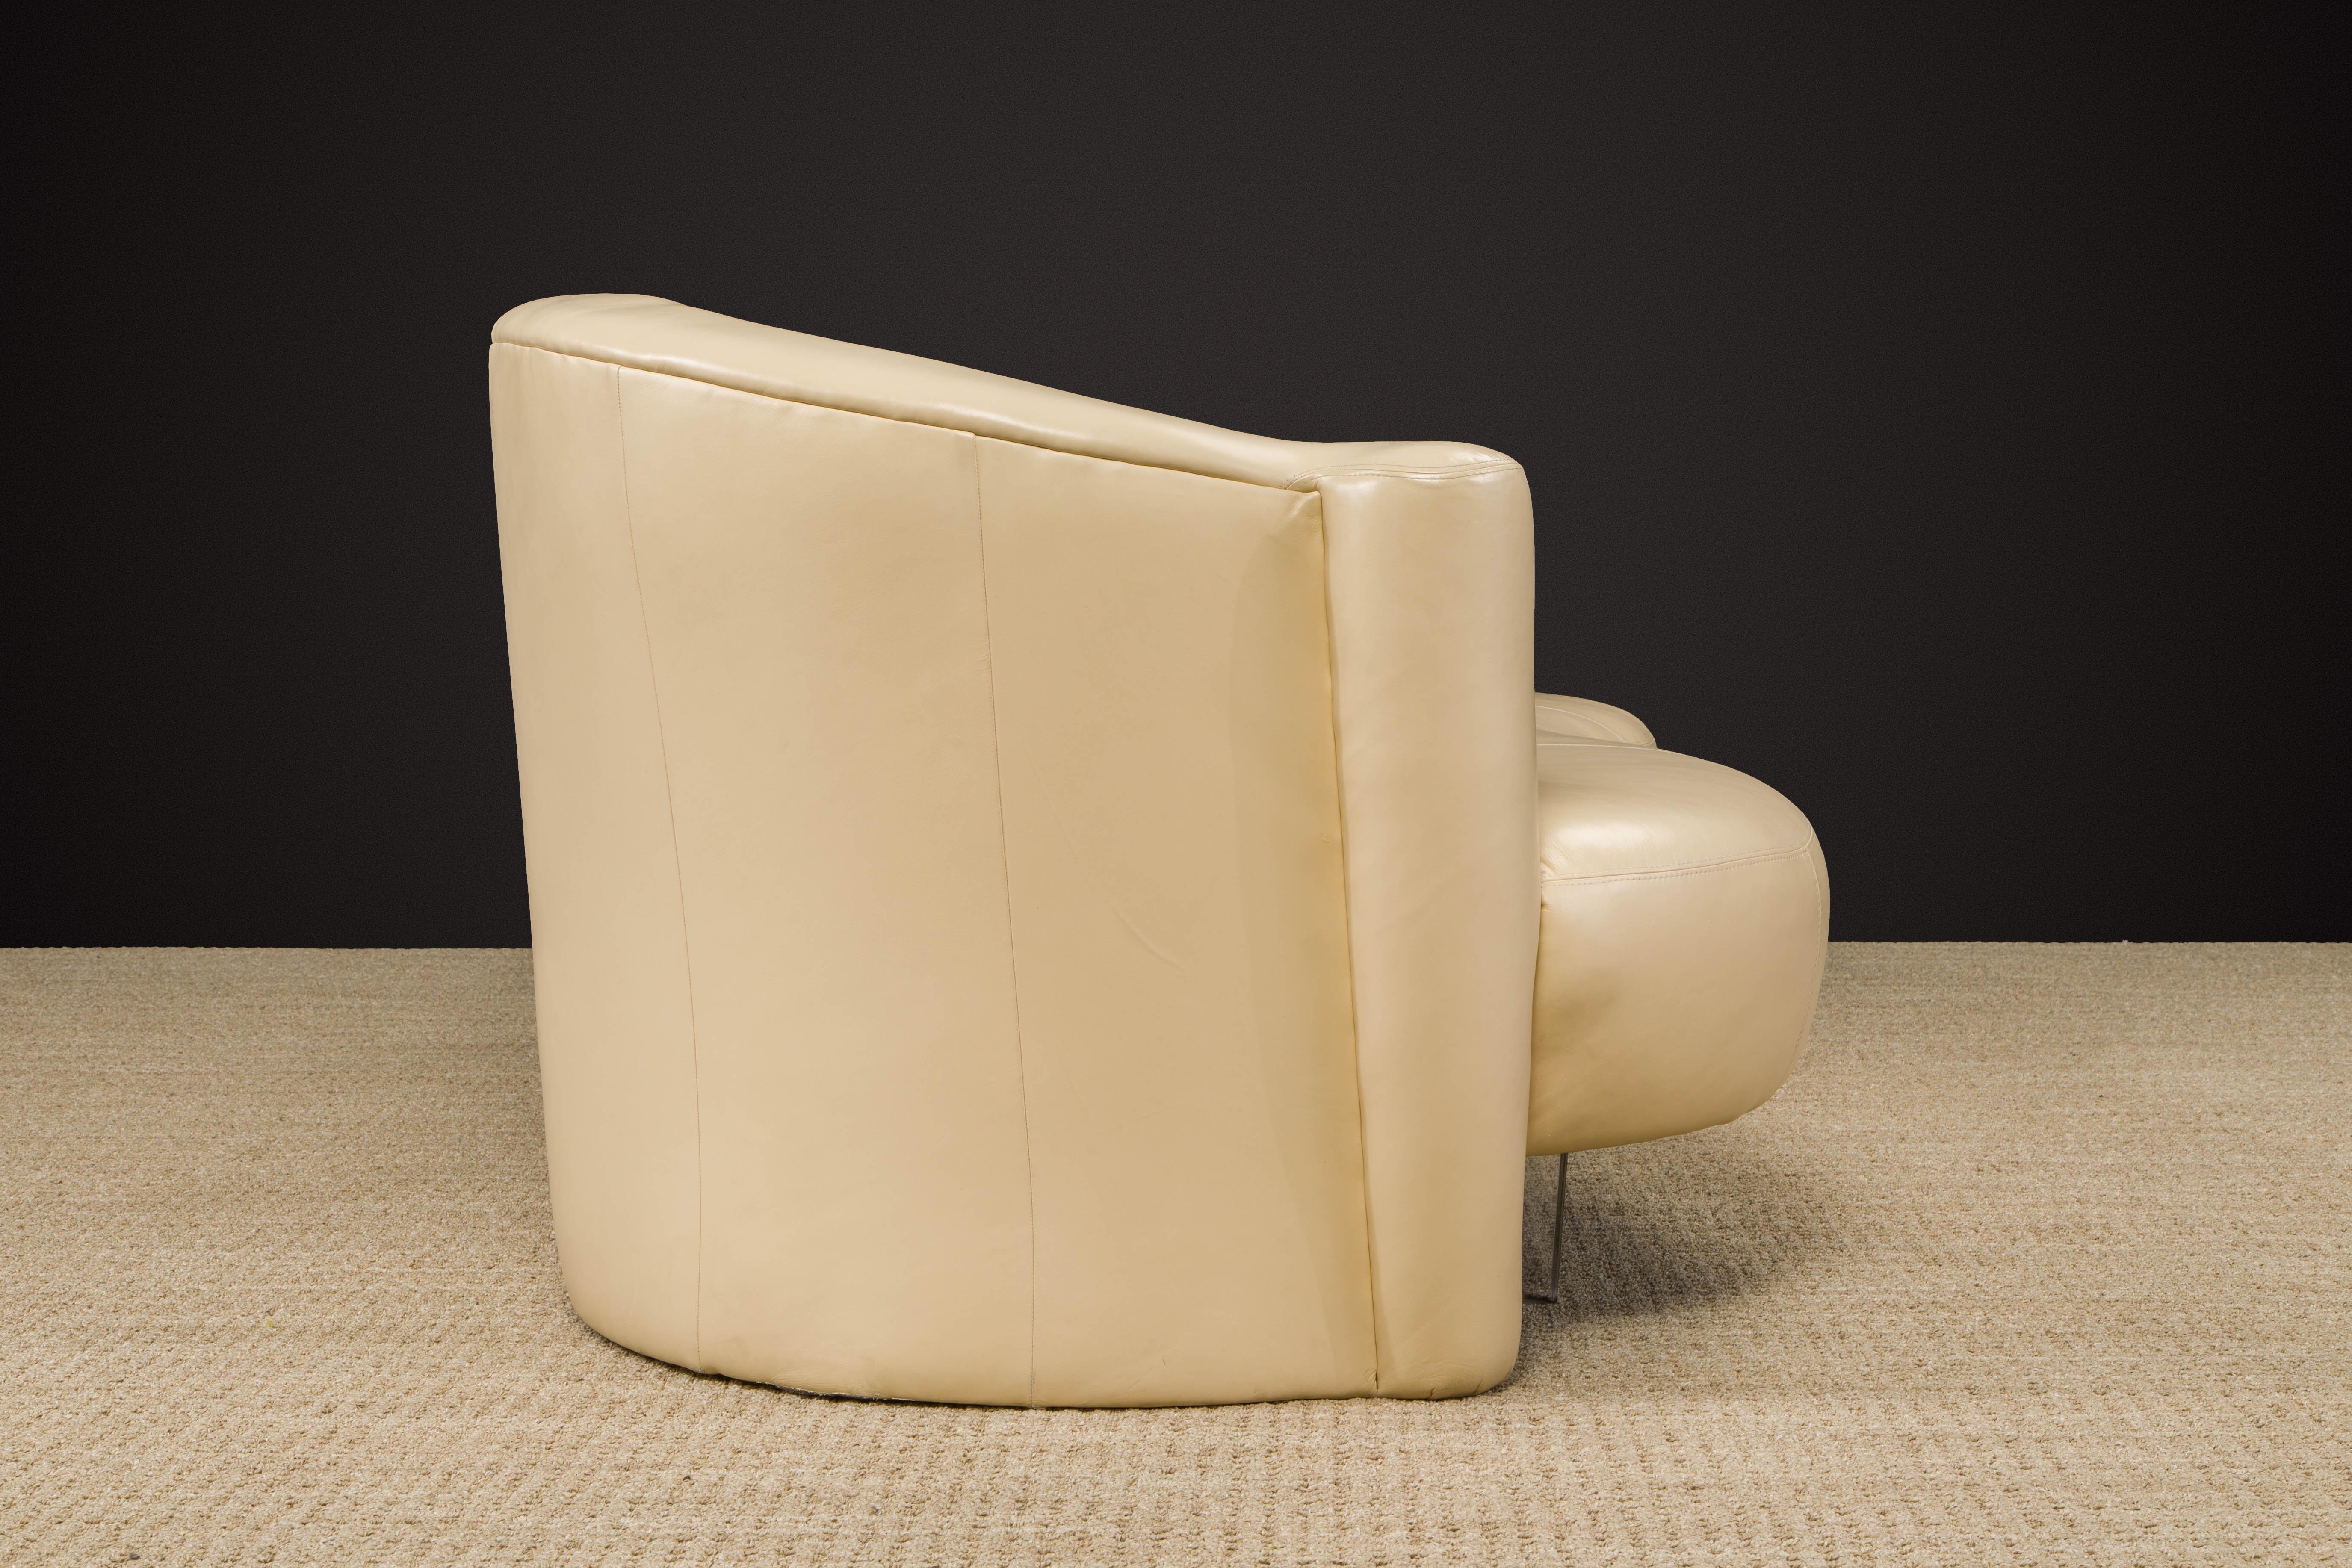 Tan Leather Cloud Style Sofa with Lucite Leg by Weiman, c 1980s, Signed For Sale 1